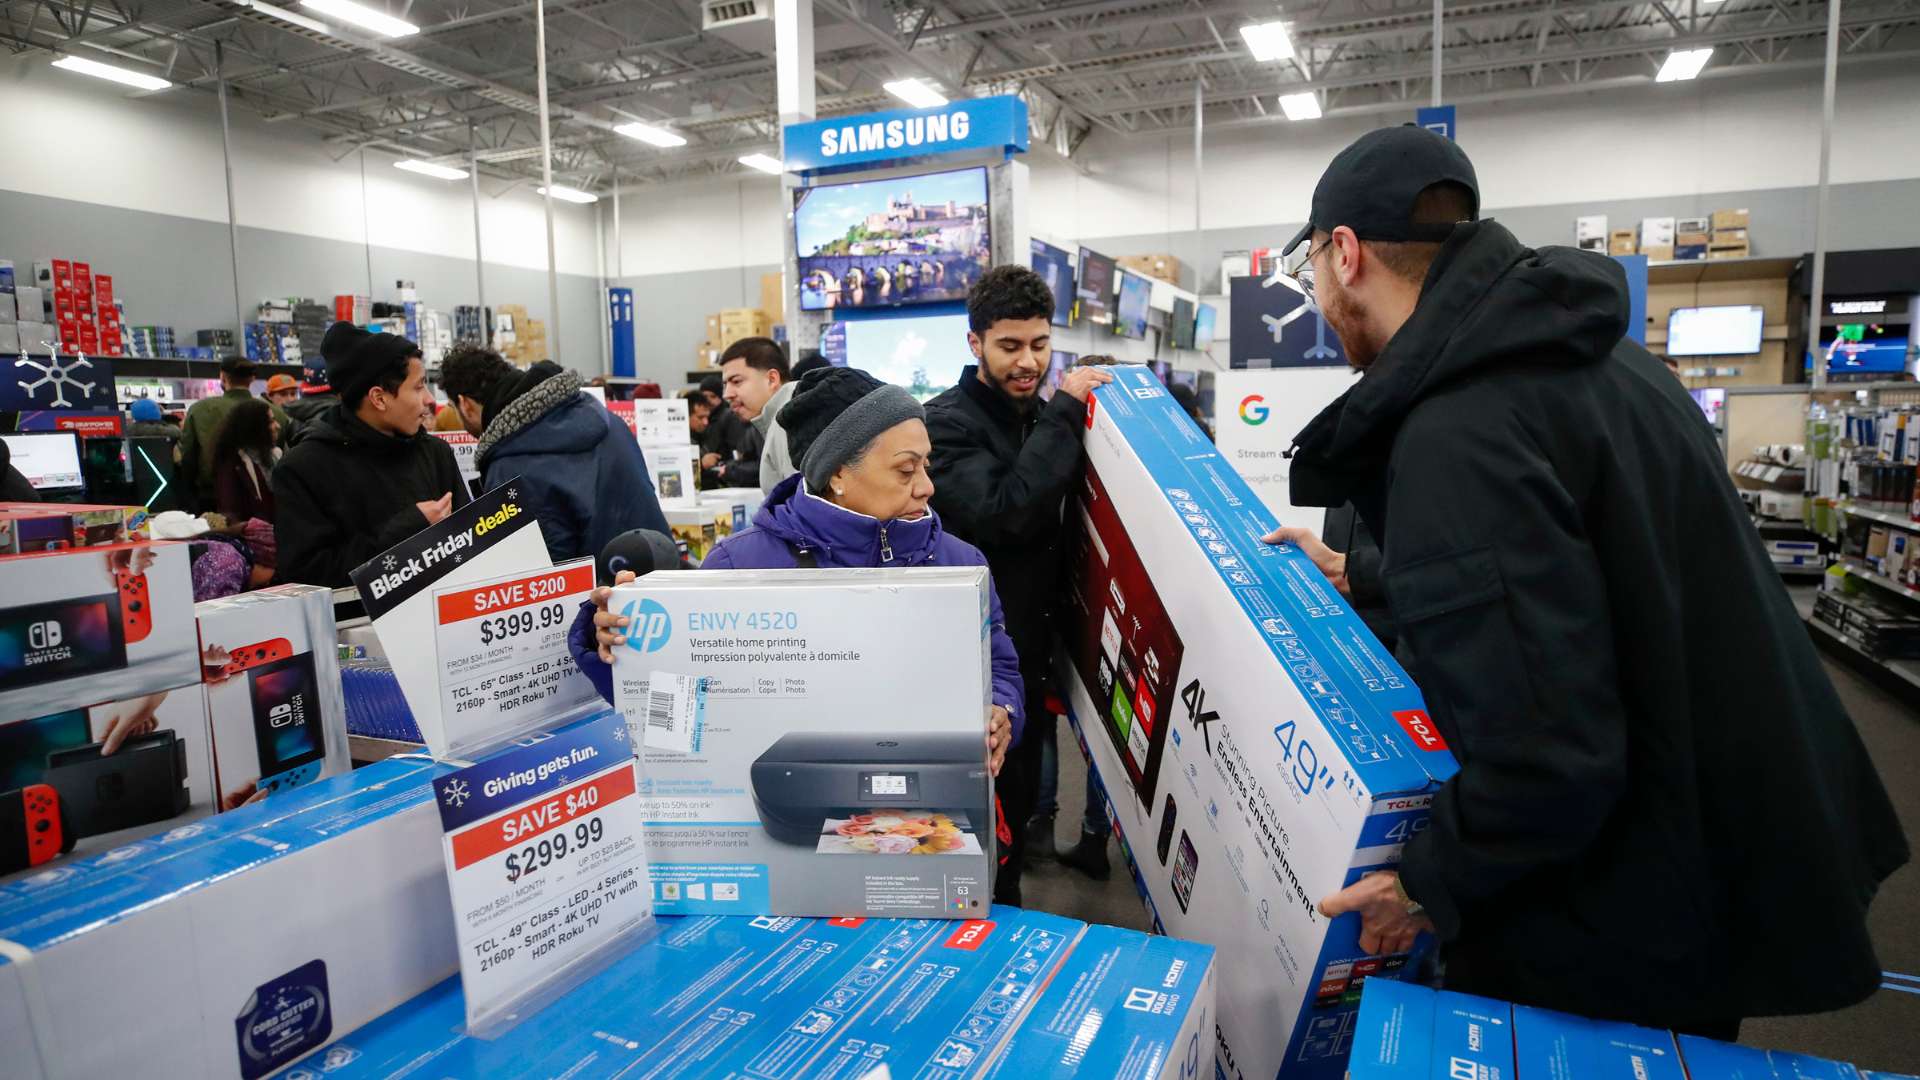 Black Friday shoppers at Best Buy